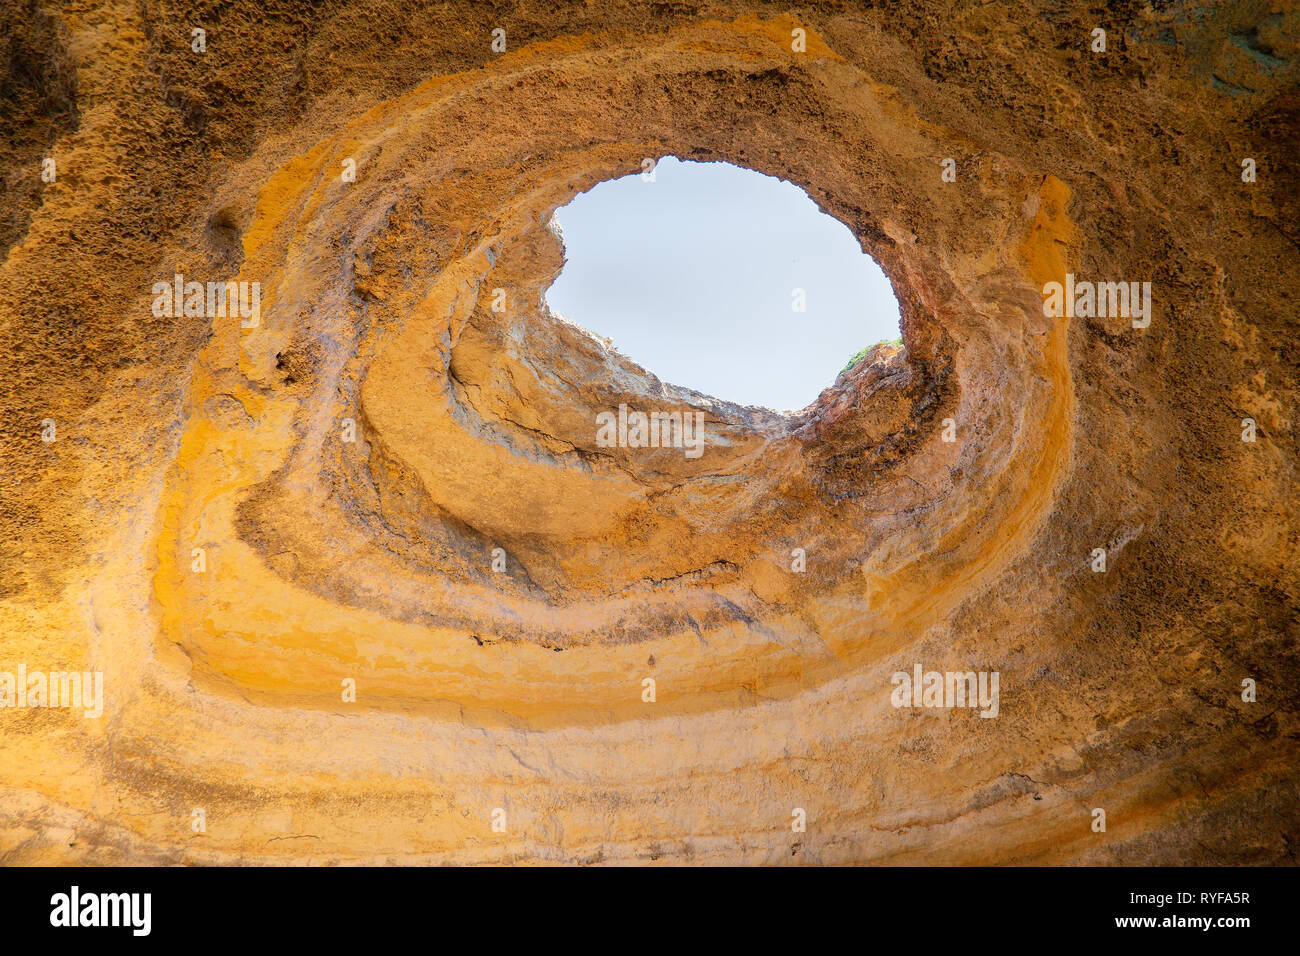 Looking up to a hole in a cave roof near Carvoeiro in Portugal Stock Photo